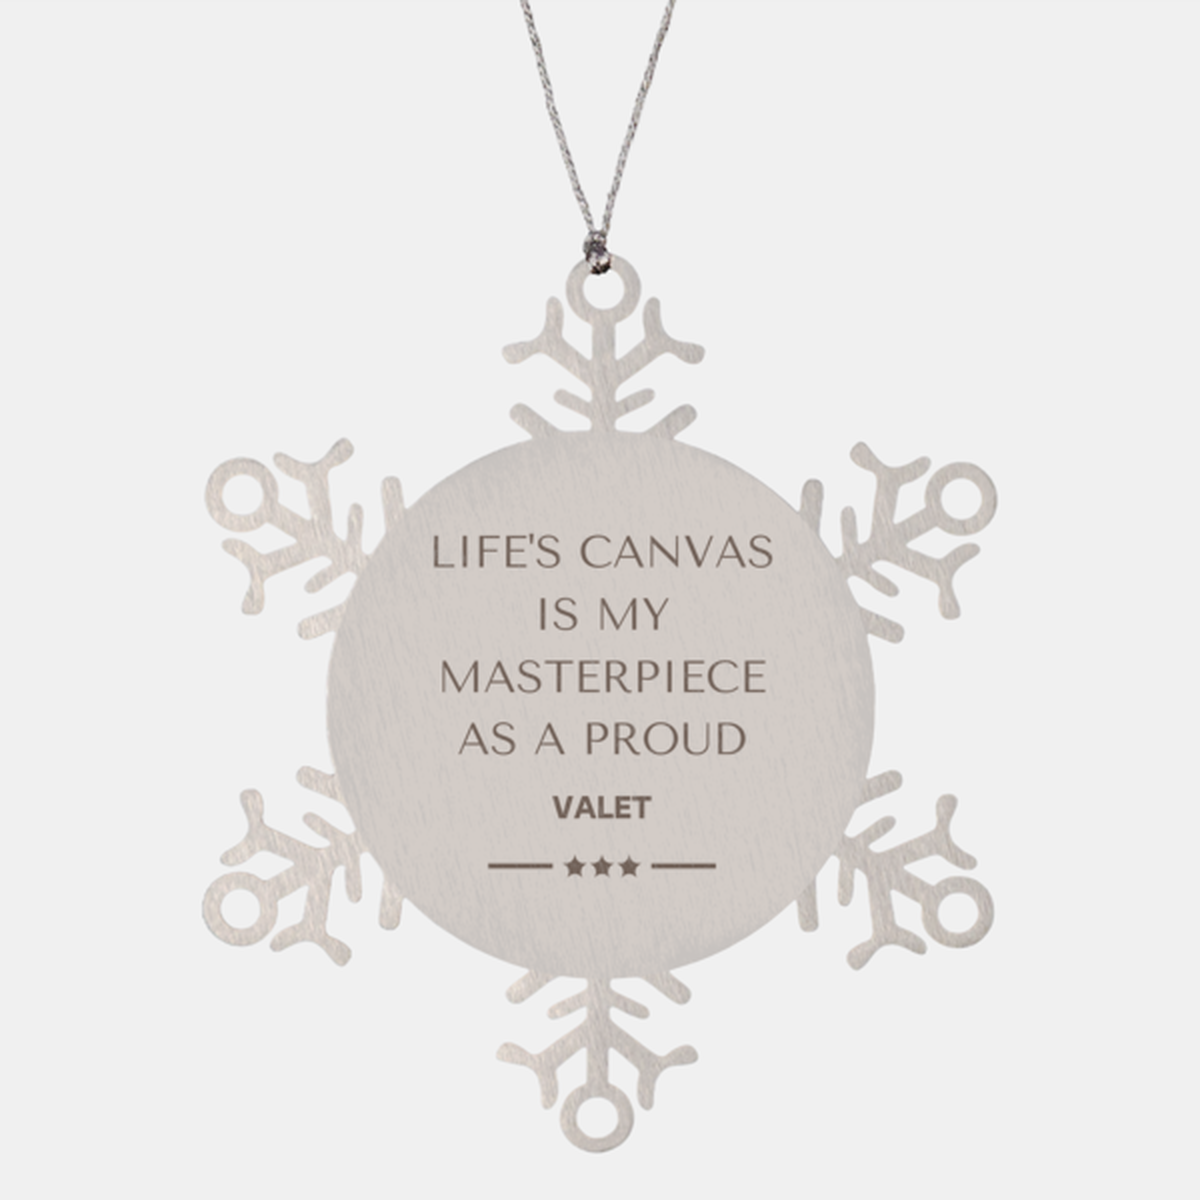 Proud Valet Gifts, Life's canvas is my masterpiece, Epic Birthday Christmas Unique Snowflake Ornament For Valet, Coworkers, Men, Women, Friends